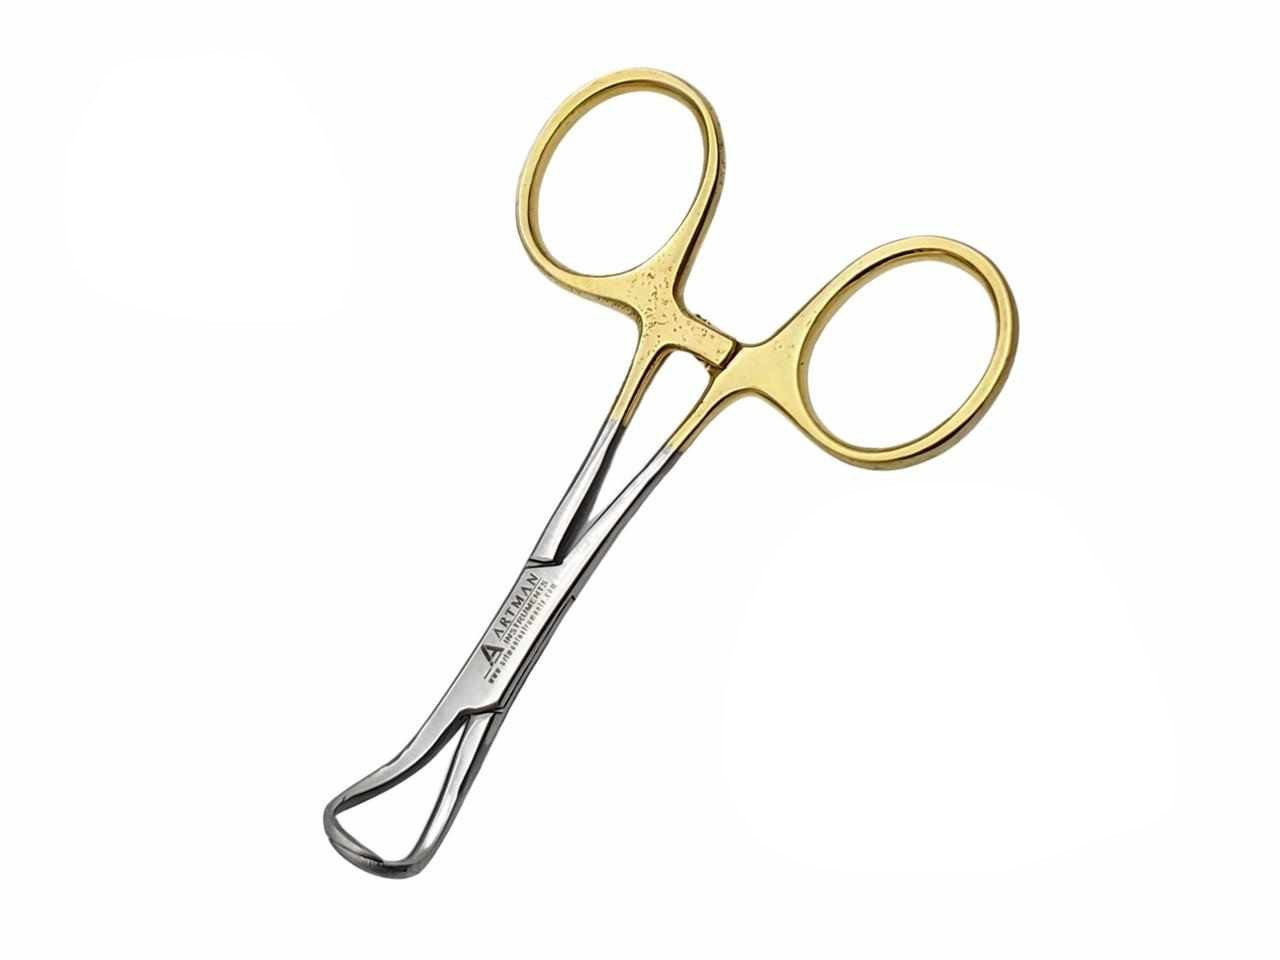 Towel Clamp Backhaus Forceps Gold Plated 3.5" Set of 3 ARTMAN